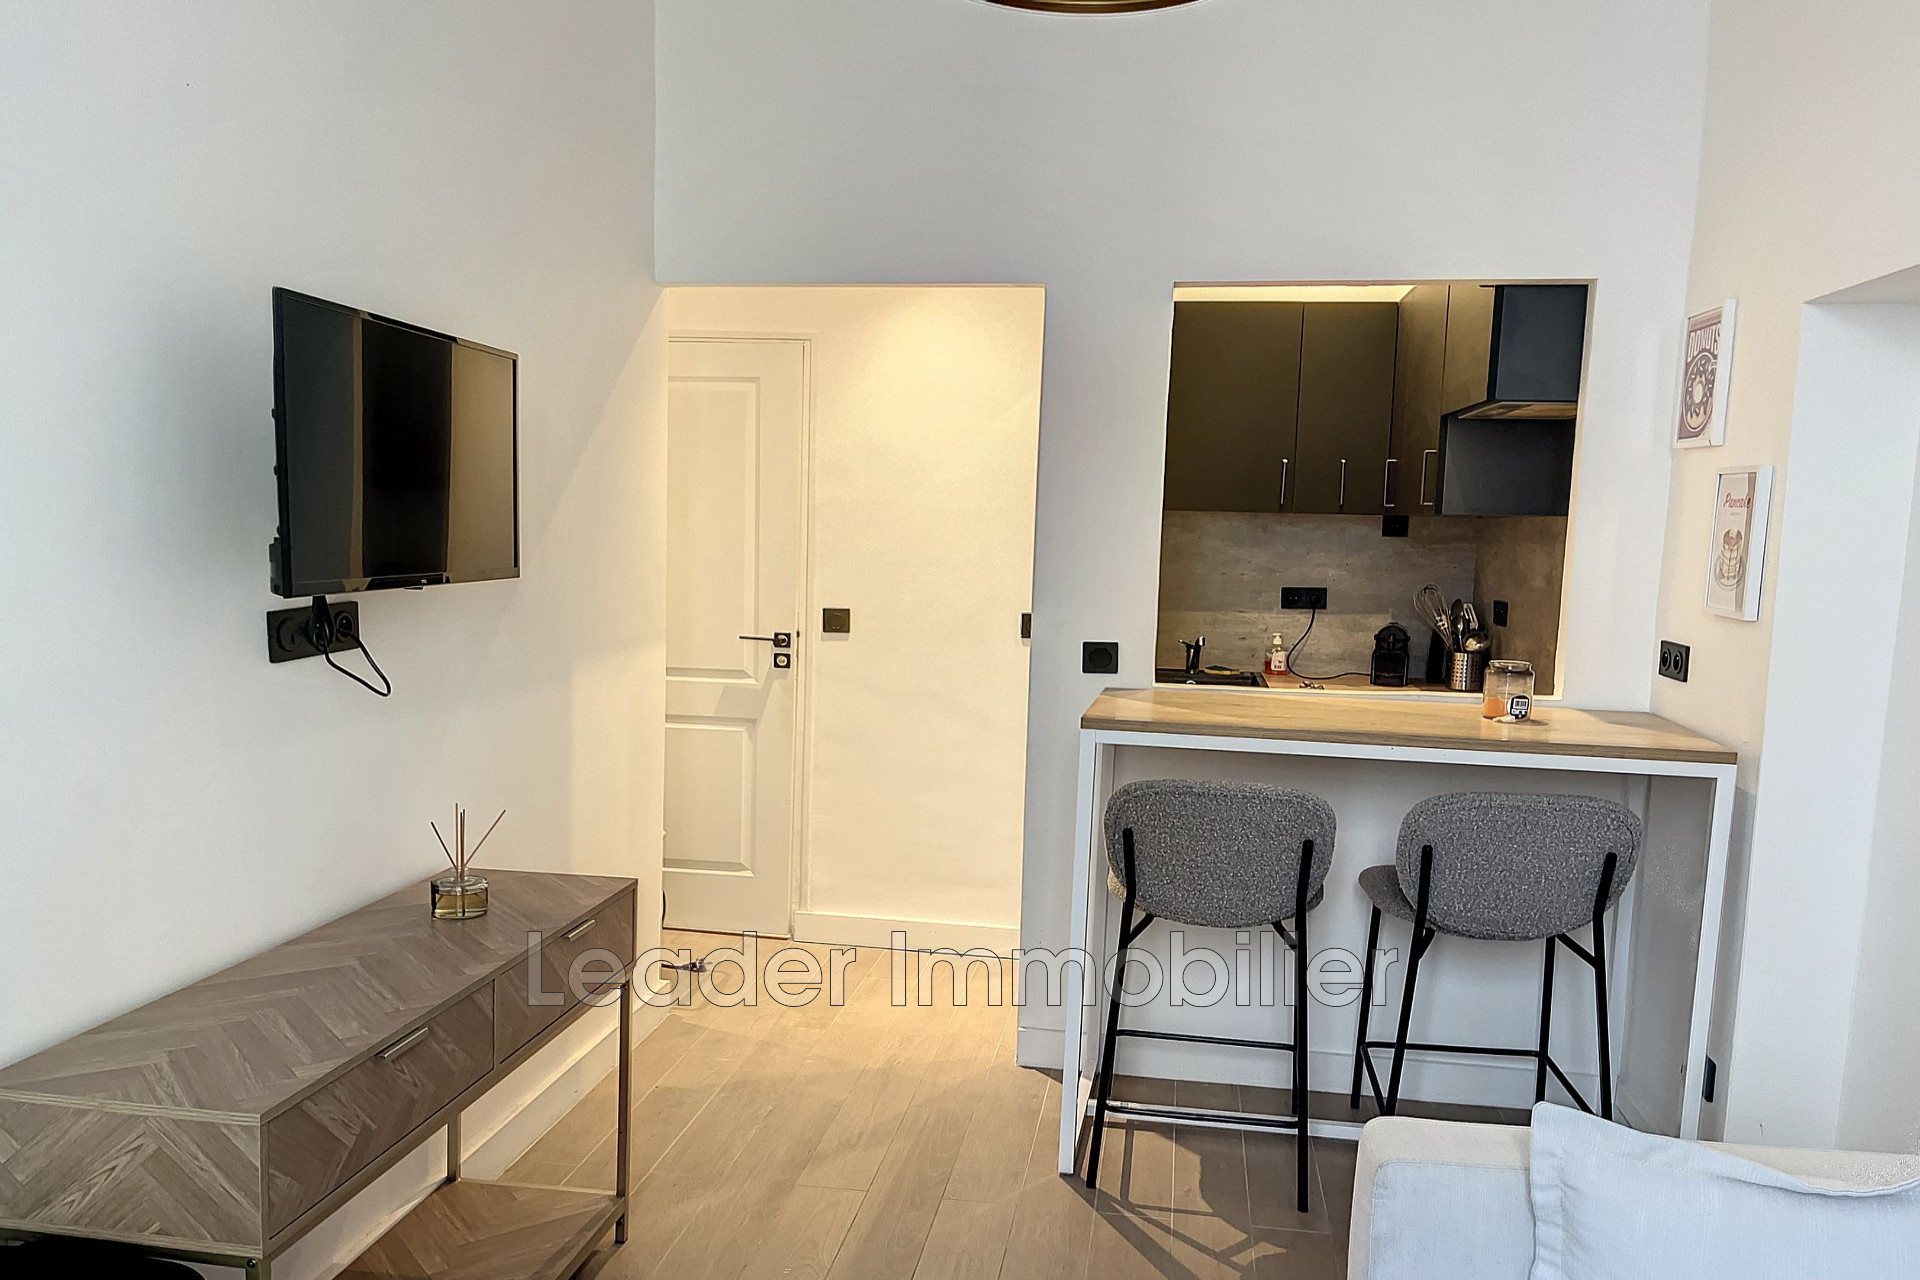 Vente Appartement 26m² à Antibes (06600) - Leader Immobilier